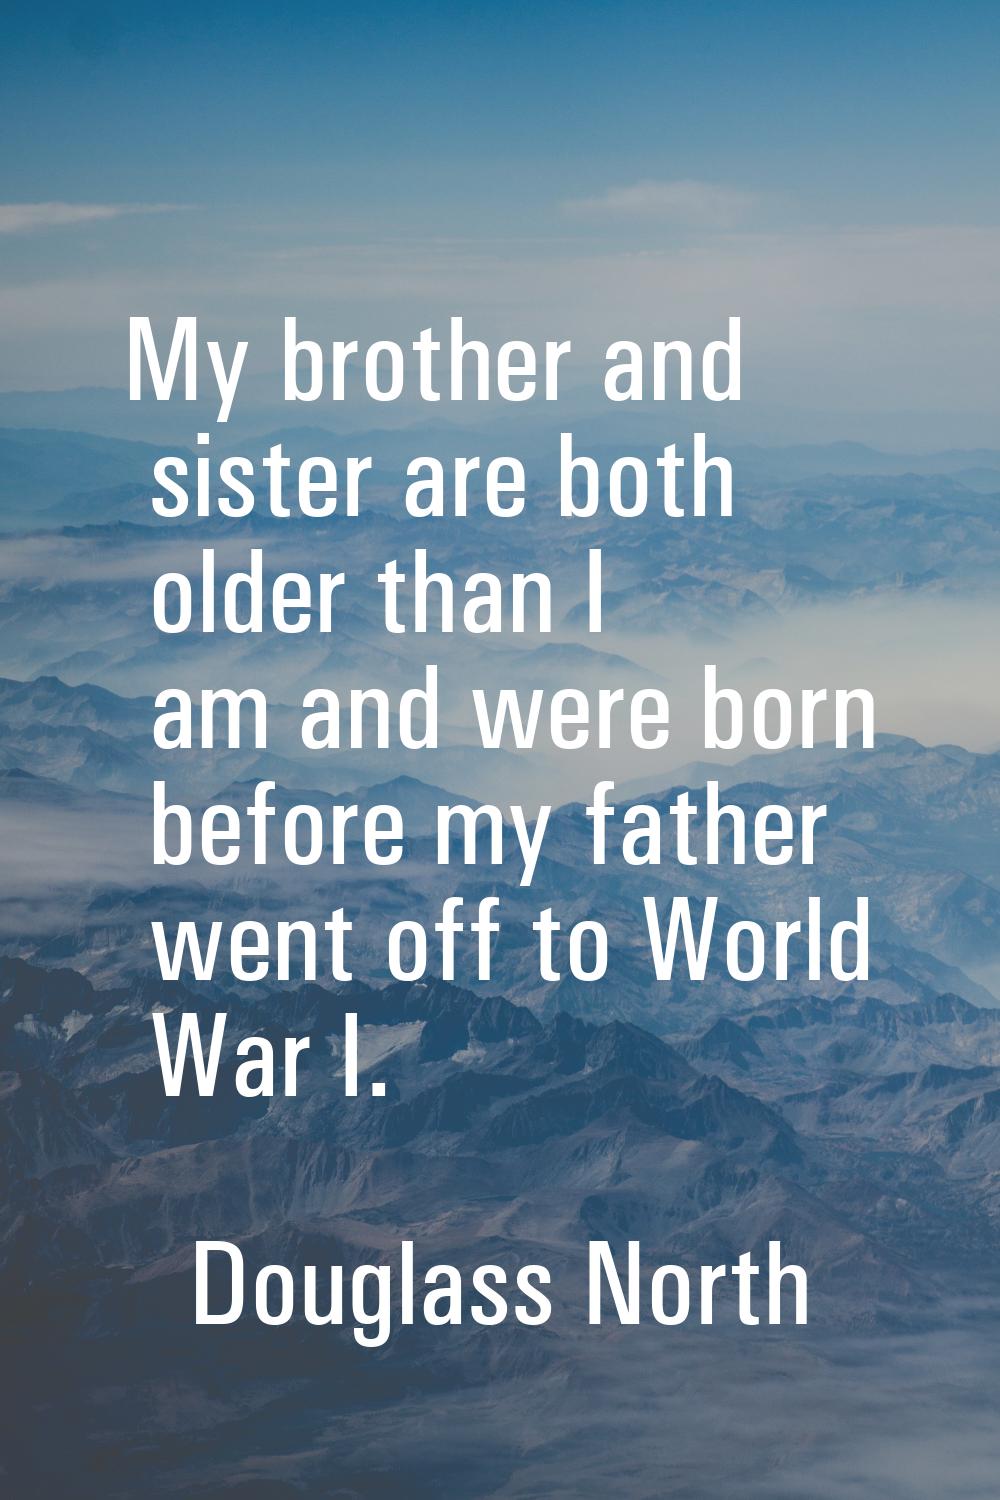 My brother and sister are both older than I am and were born before my father went off to World War